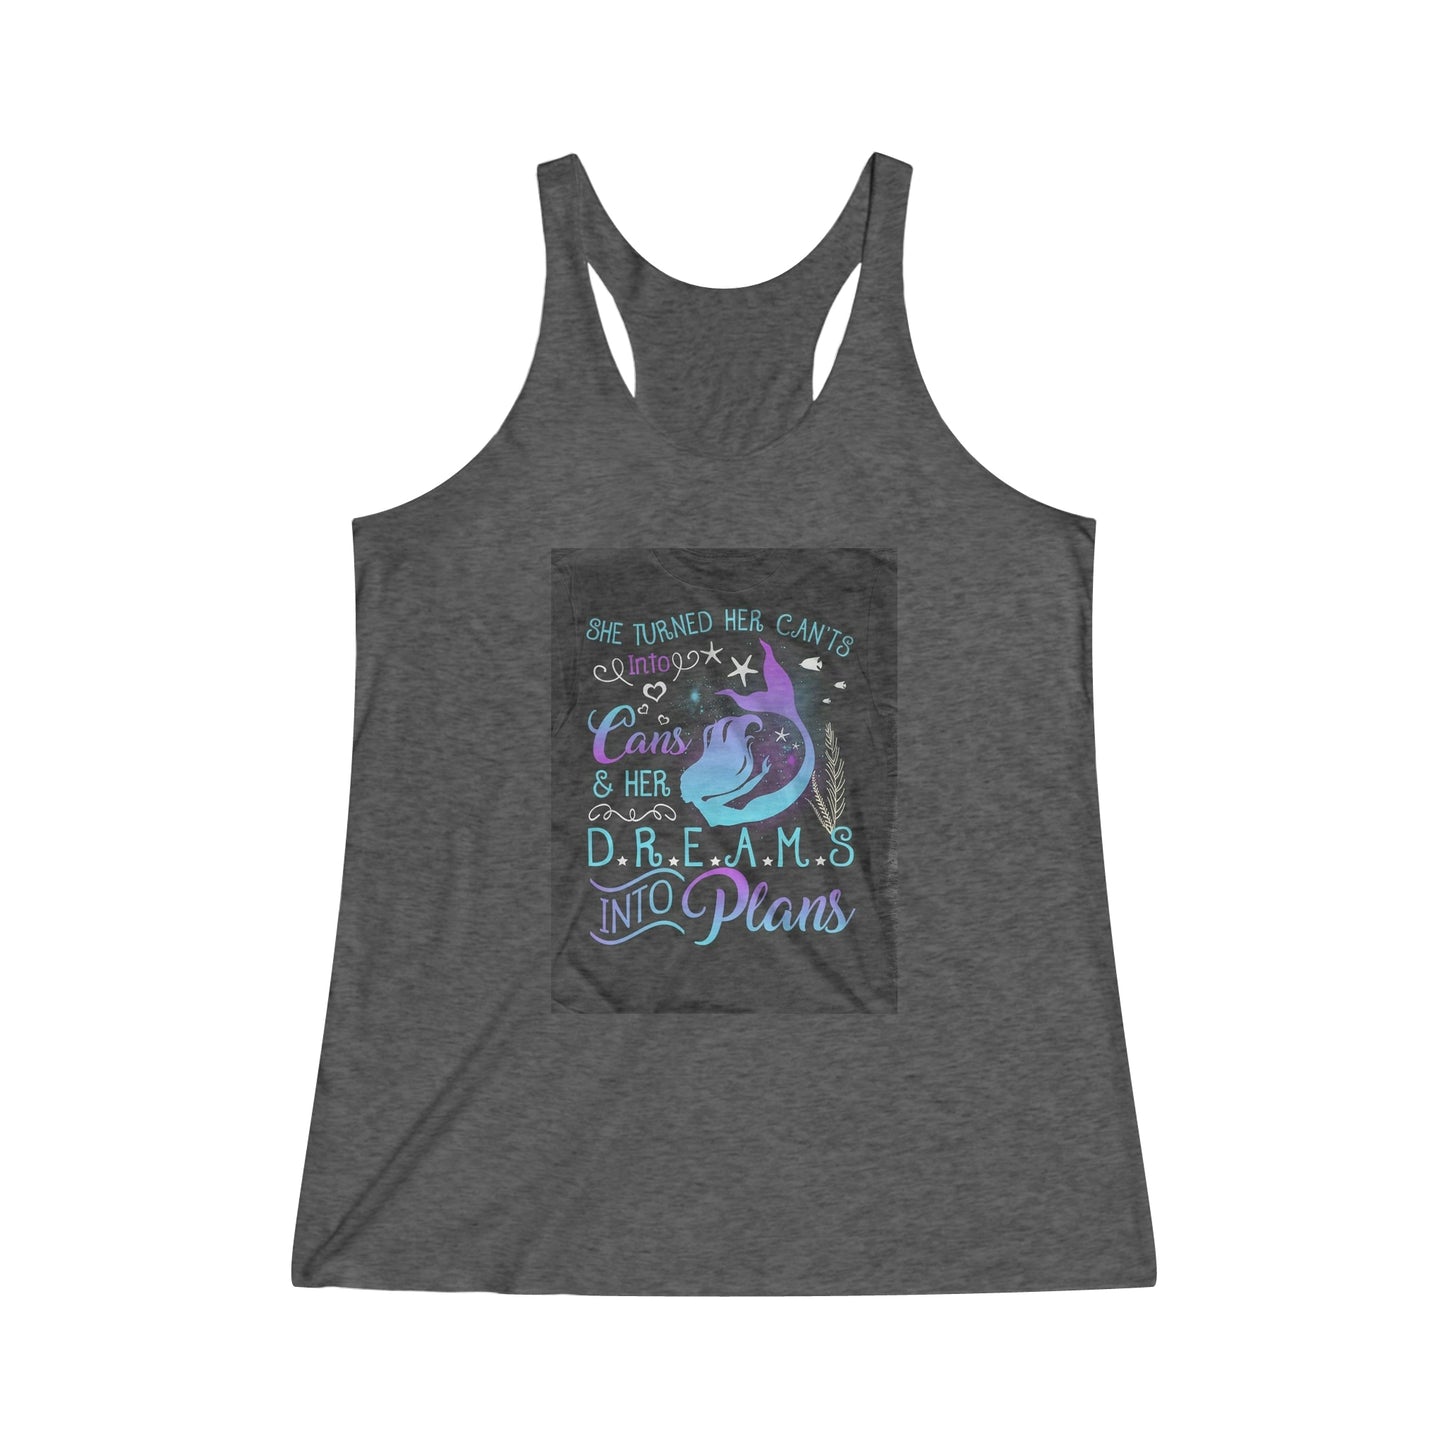 Can'ts into Cans: Women's Tri-Blend Racerback Tank